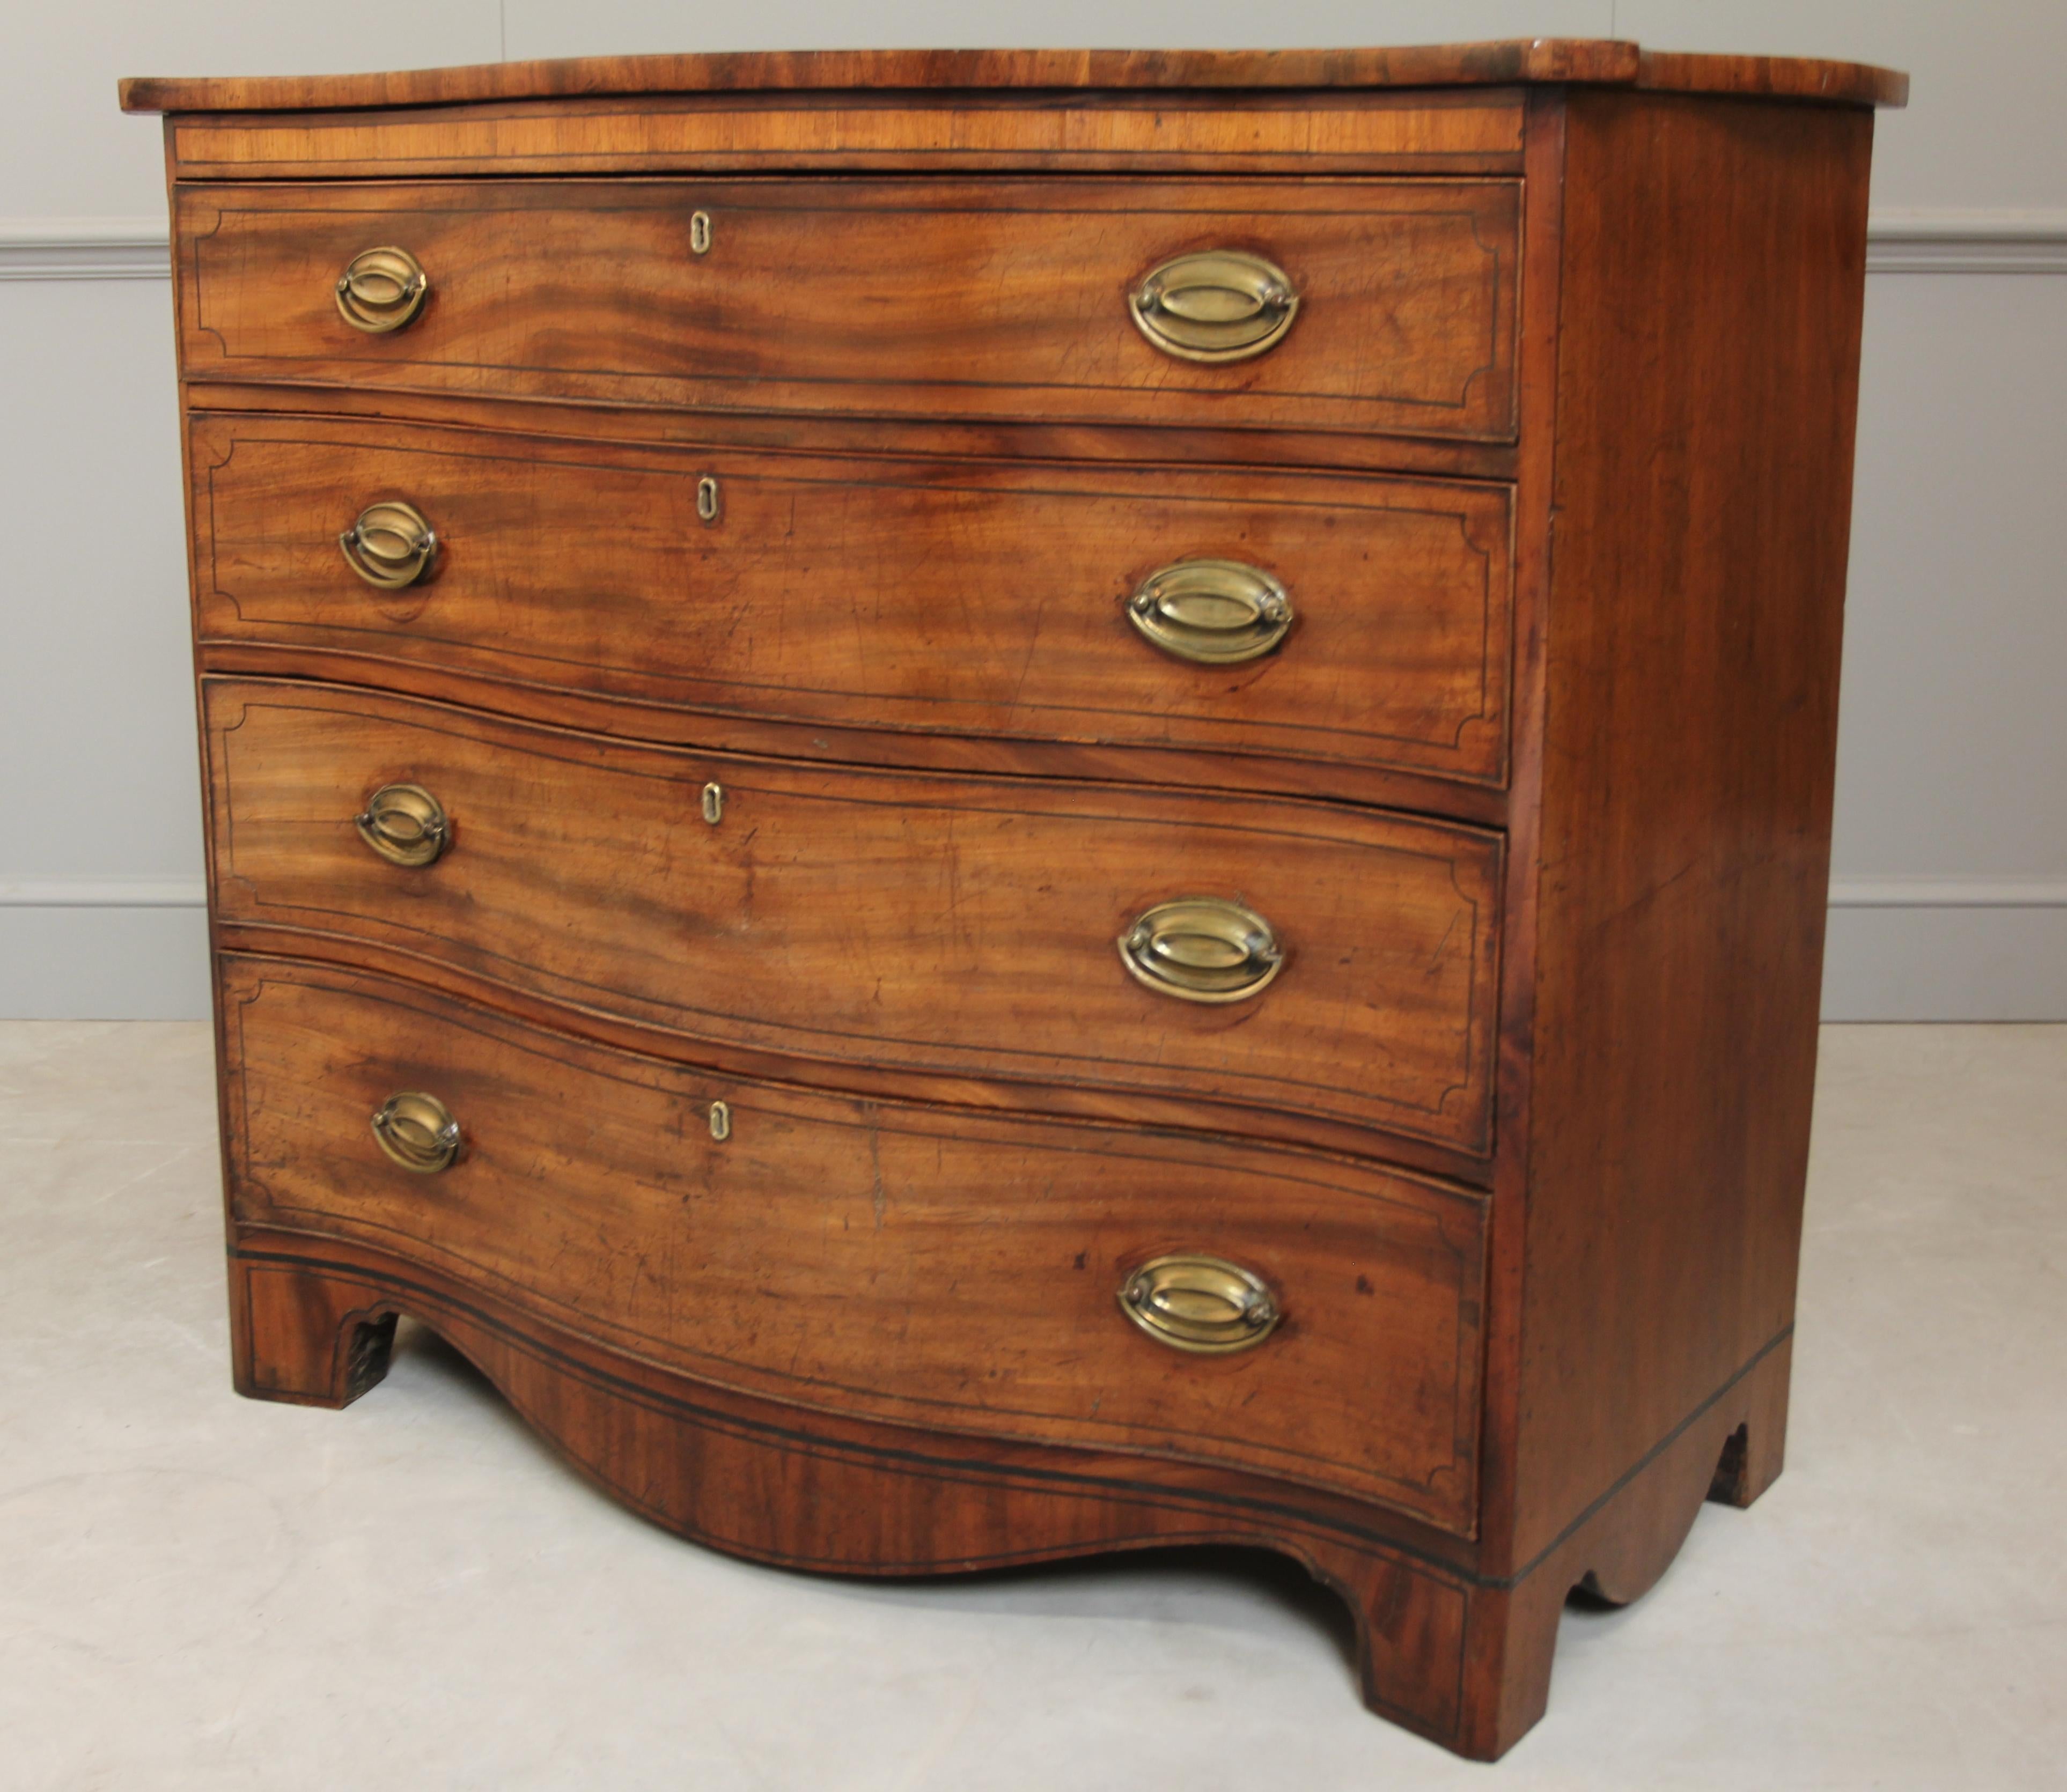 A George III mahogany serpentine chest of drawers with satinwood banding and ebony inlay stringing and four graduated long drawers, top drawer divided into three. all drawers run smoothly.
Measures: H 104cms x W 120cms x D 59cms
Coming from the